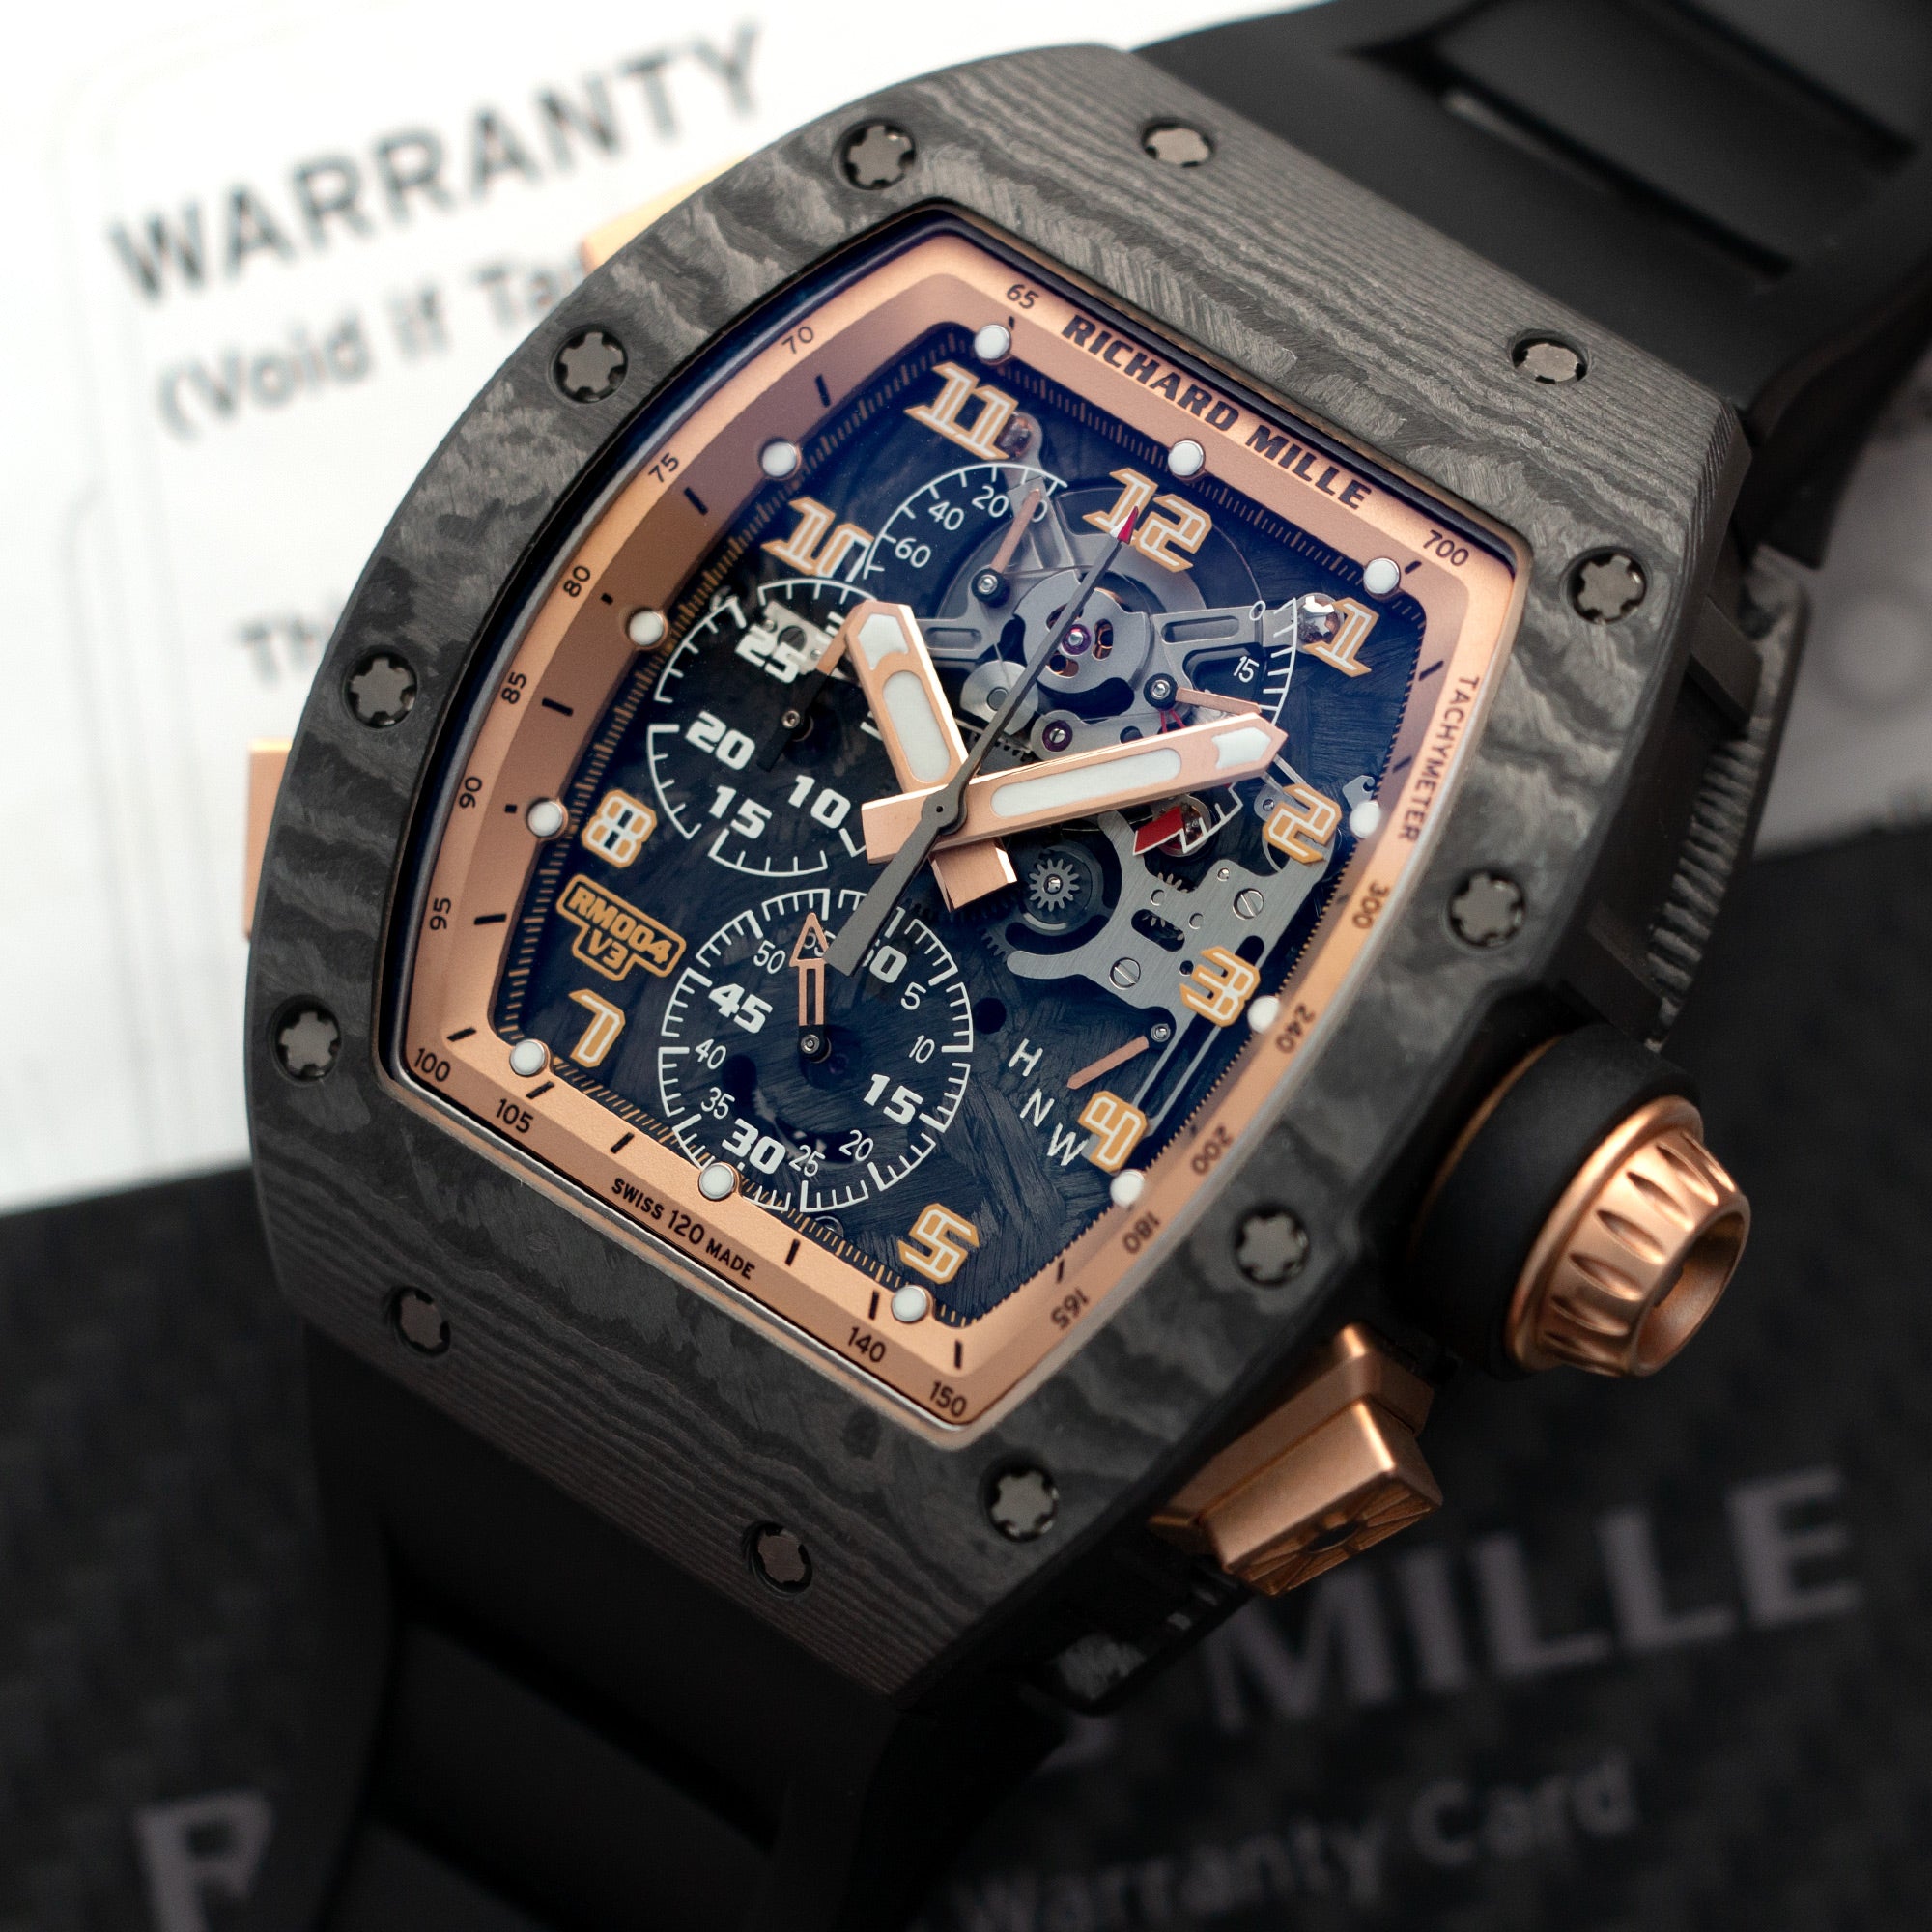 Richard Mille - Richard Mille Rose Gold Split Seconds Chrono Ref. RM004 V3 Asia Edition - The Keystone Watches